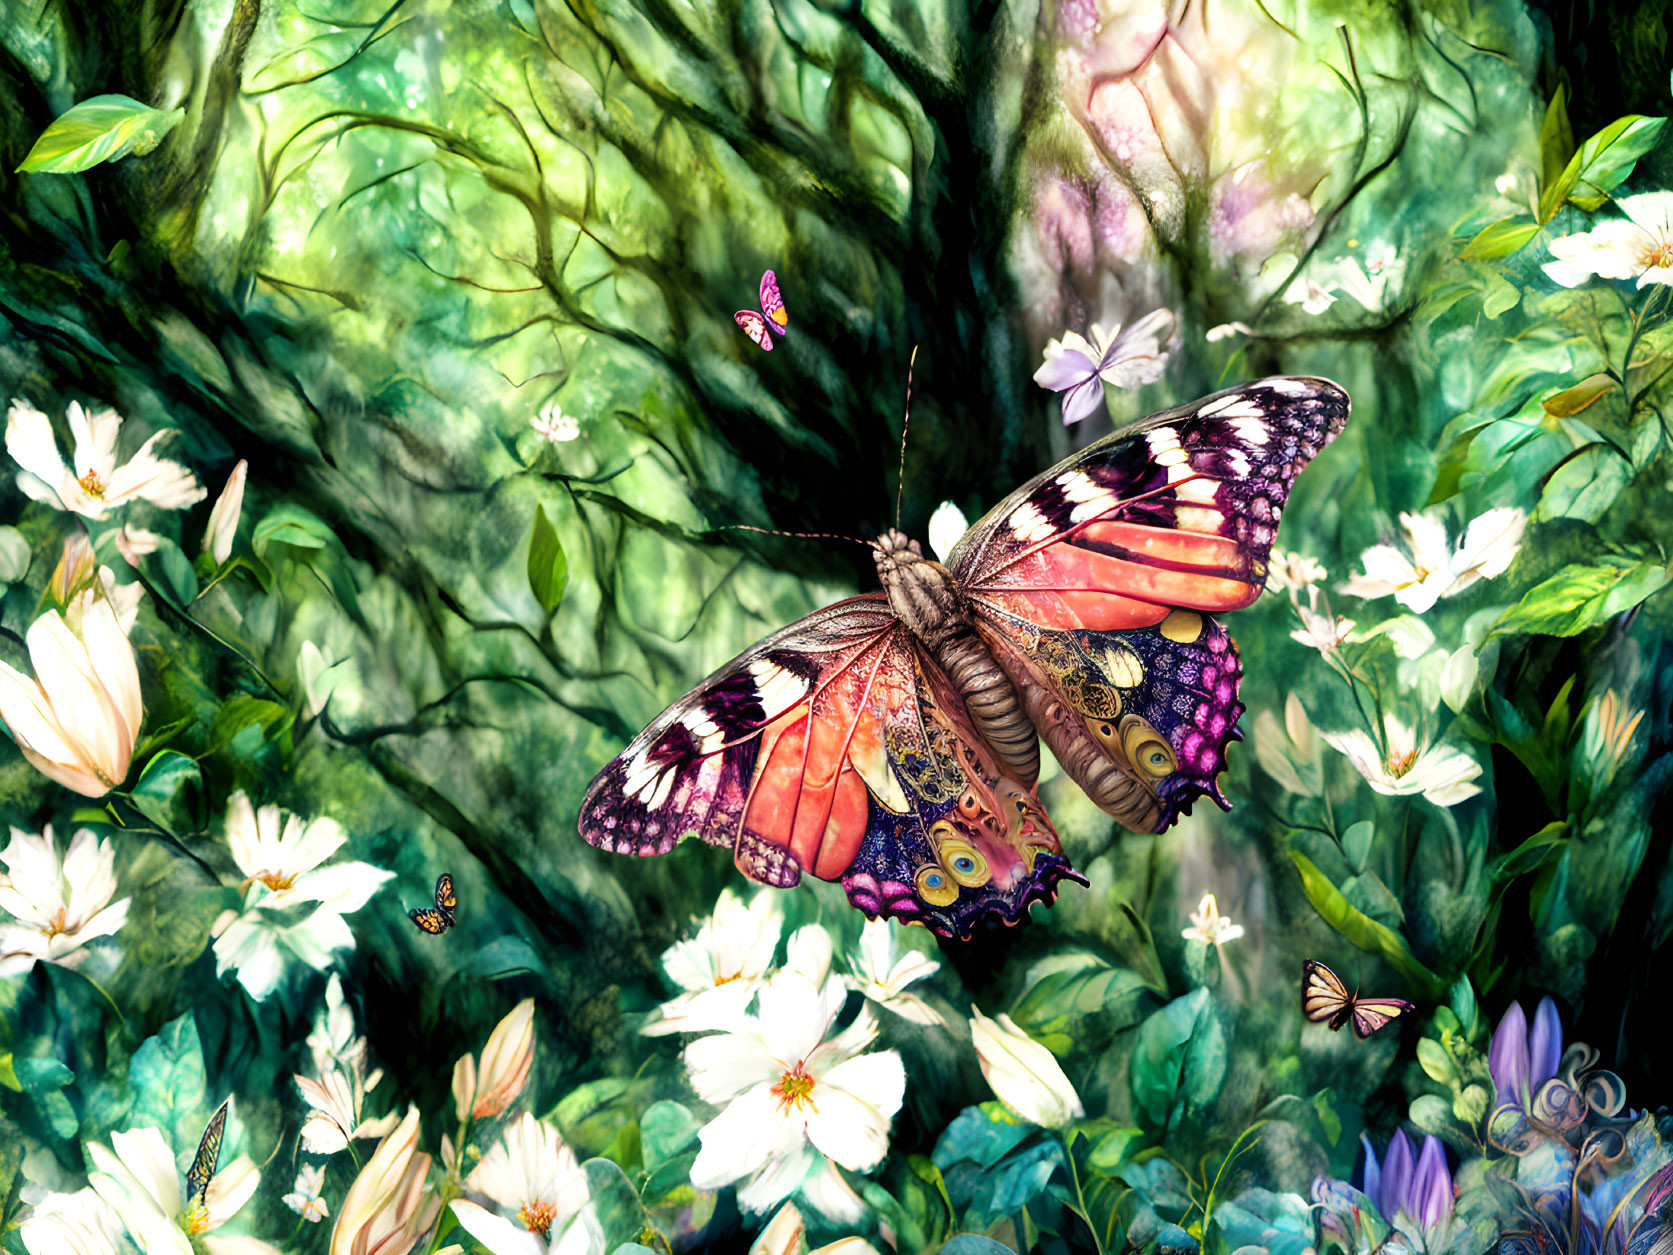 Colorful Butterfly Illustration Among White Flowers and Greenery